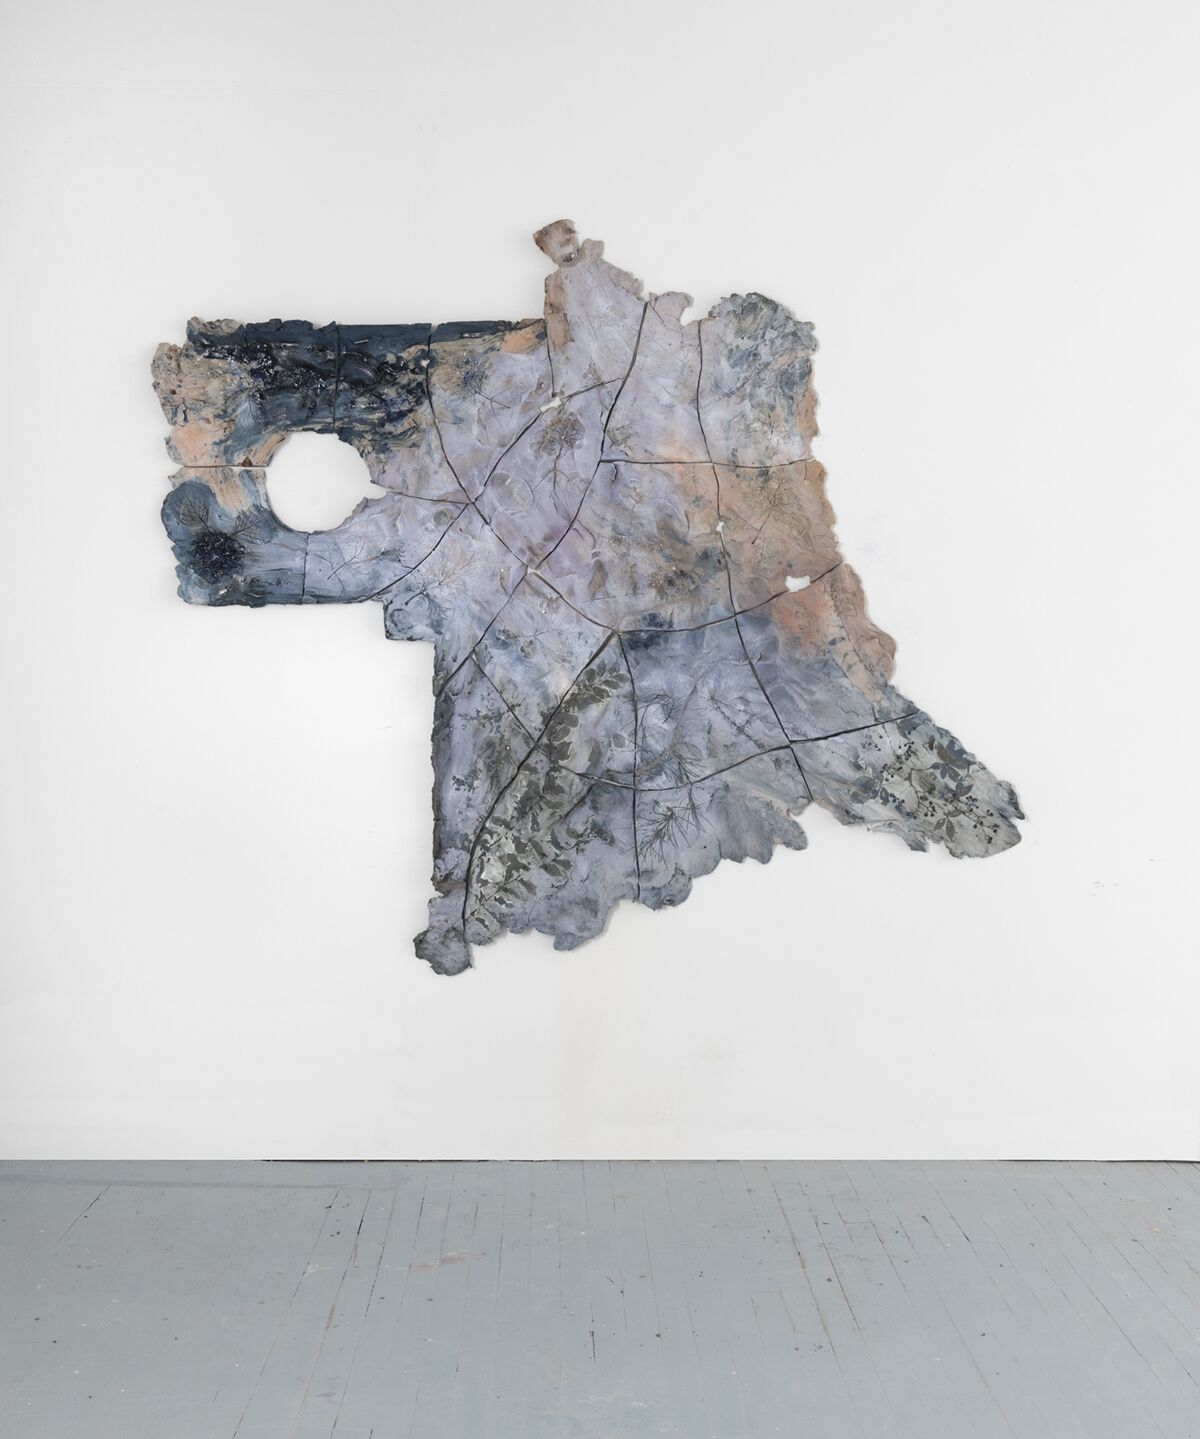 Brie Ruais' "Topology of a Garden, Southwest, 127.5 lbs.," 2018. Pigmented clay, underglaze, and hardware, 68 inches by 78 inches by 2.5 inches.